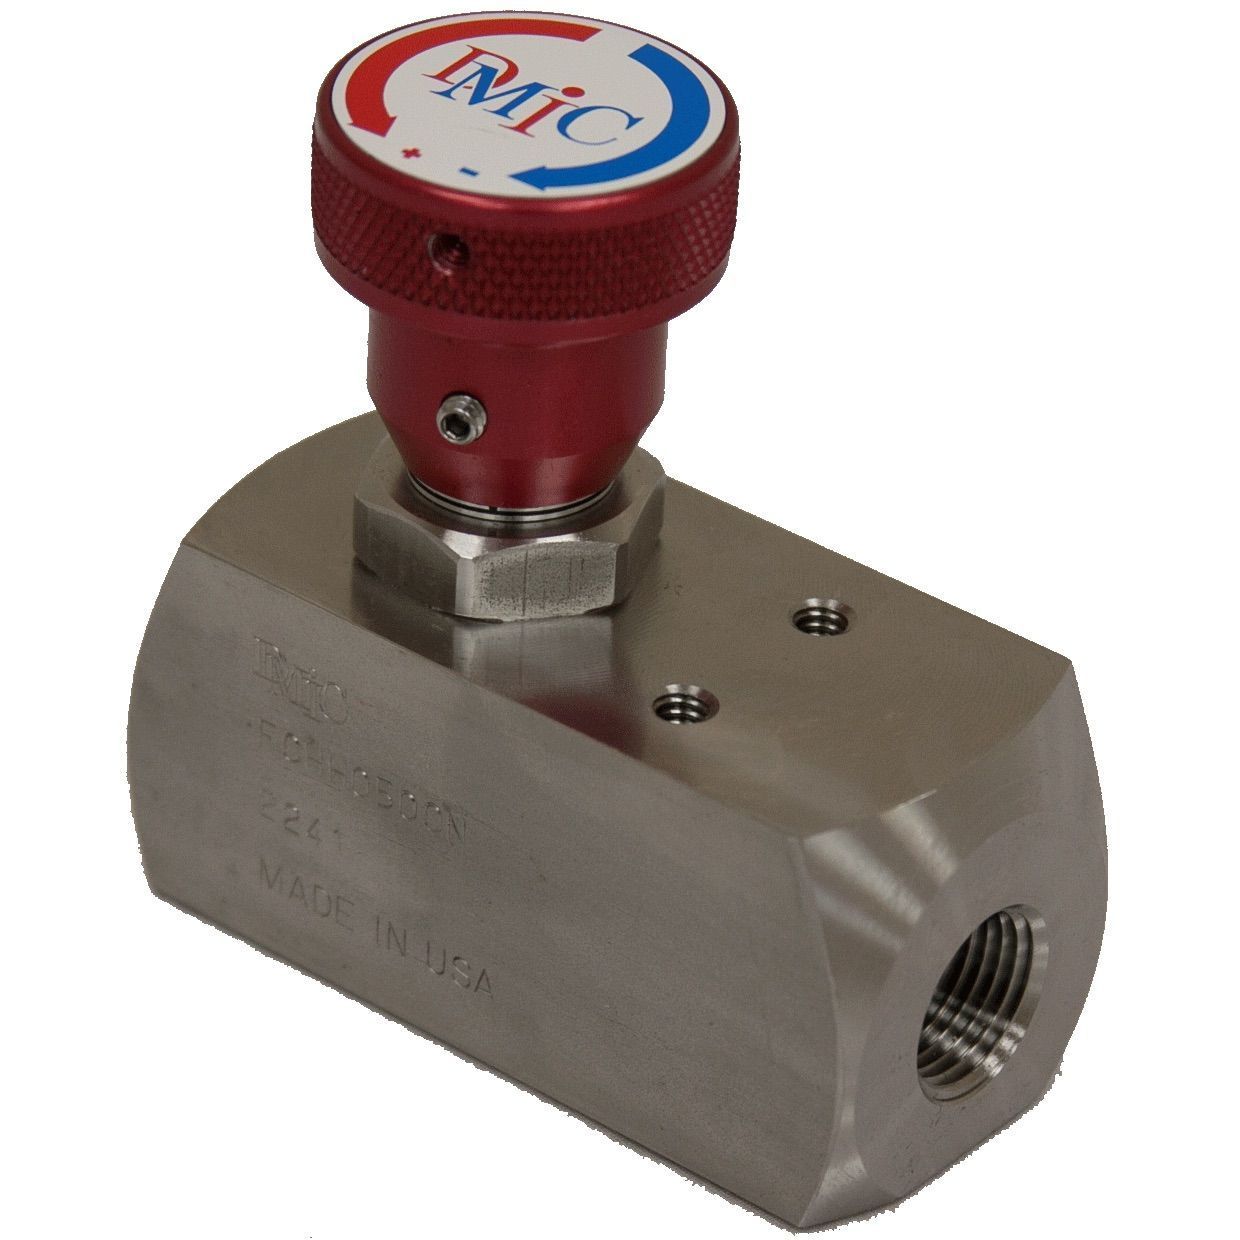 FCHH-0500S-2221 : DMIC Flow Control, Unidirectional, with Integrated Check, #8 SAE (1/2"), 316SS, 10000psi